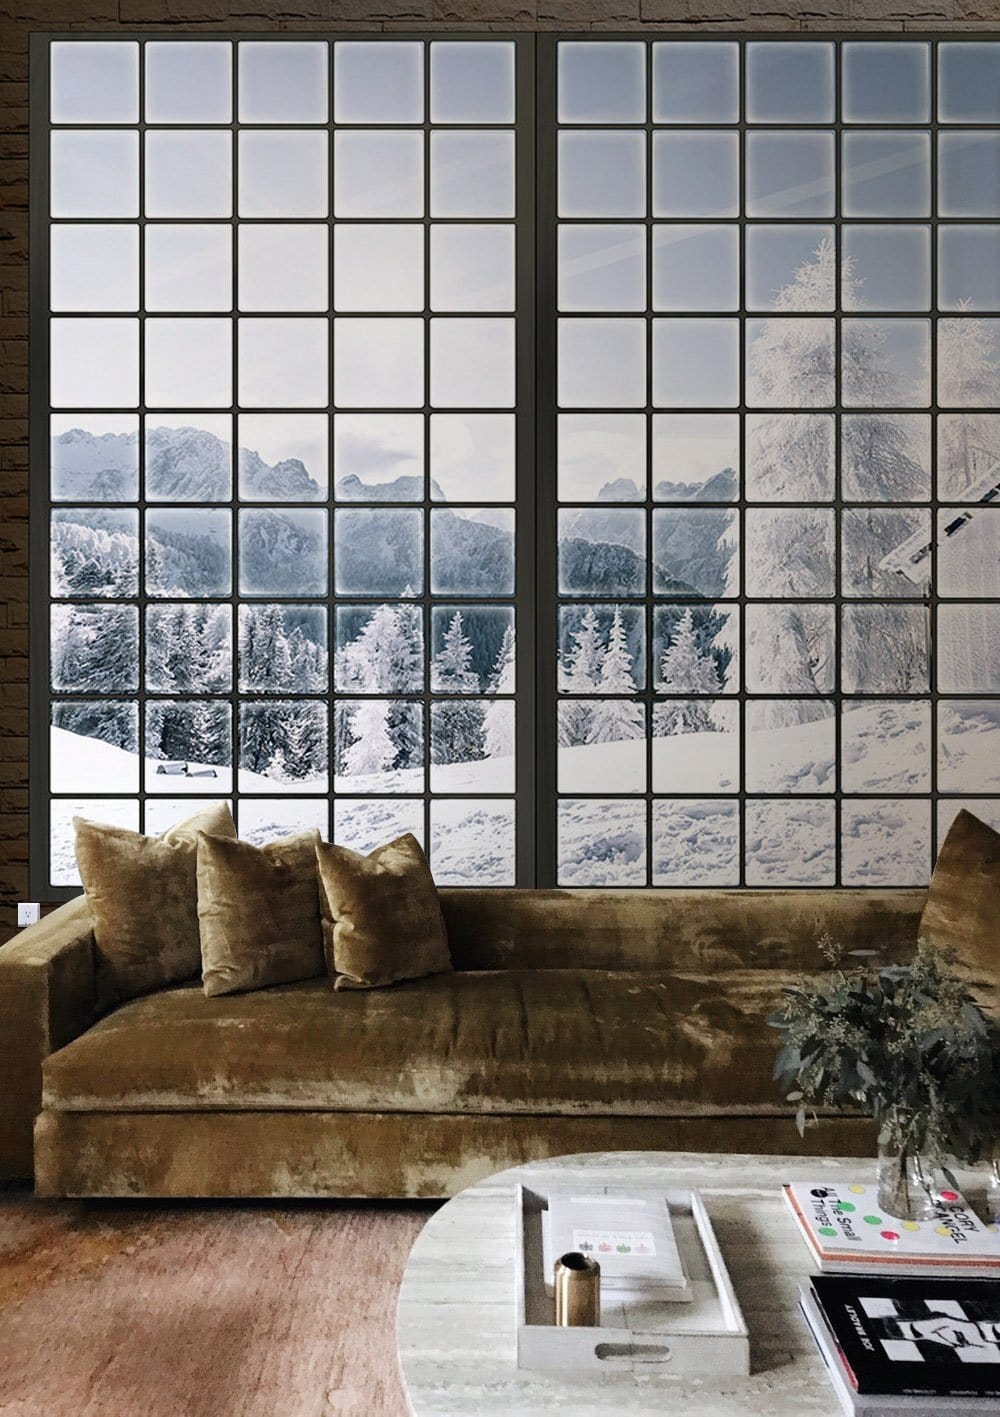 Window with a Snow View Wallpaper Mural for Use in Decorating the Living Room